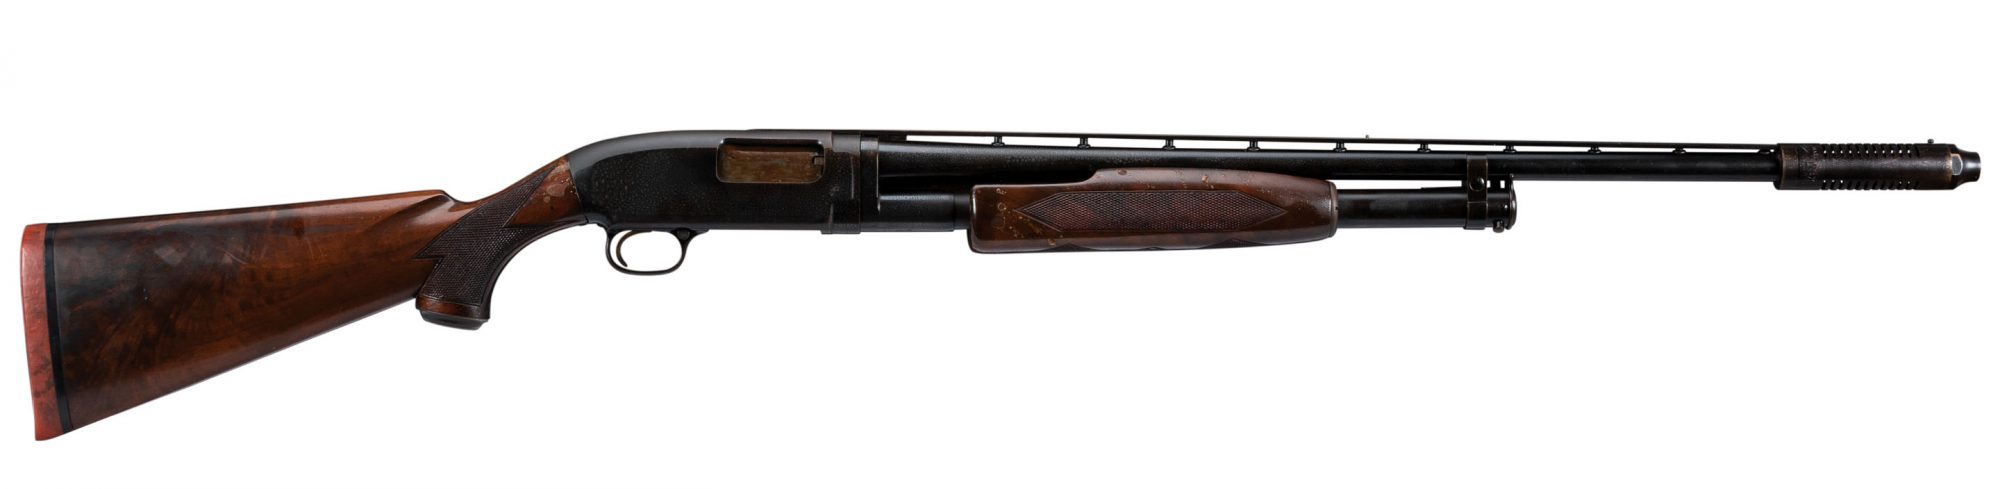 Photo of a Winchester Model 12 from 1958 before restoration work by Turnbull Restoration of Bloomfield, NY